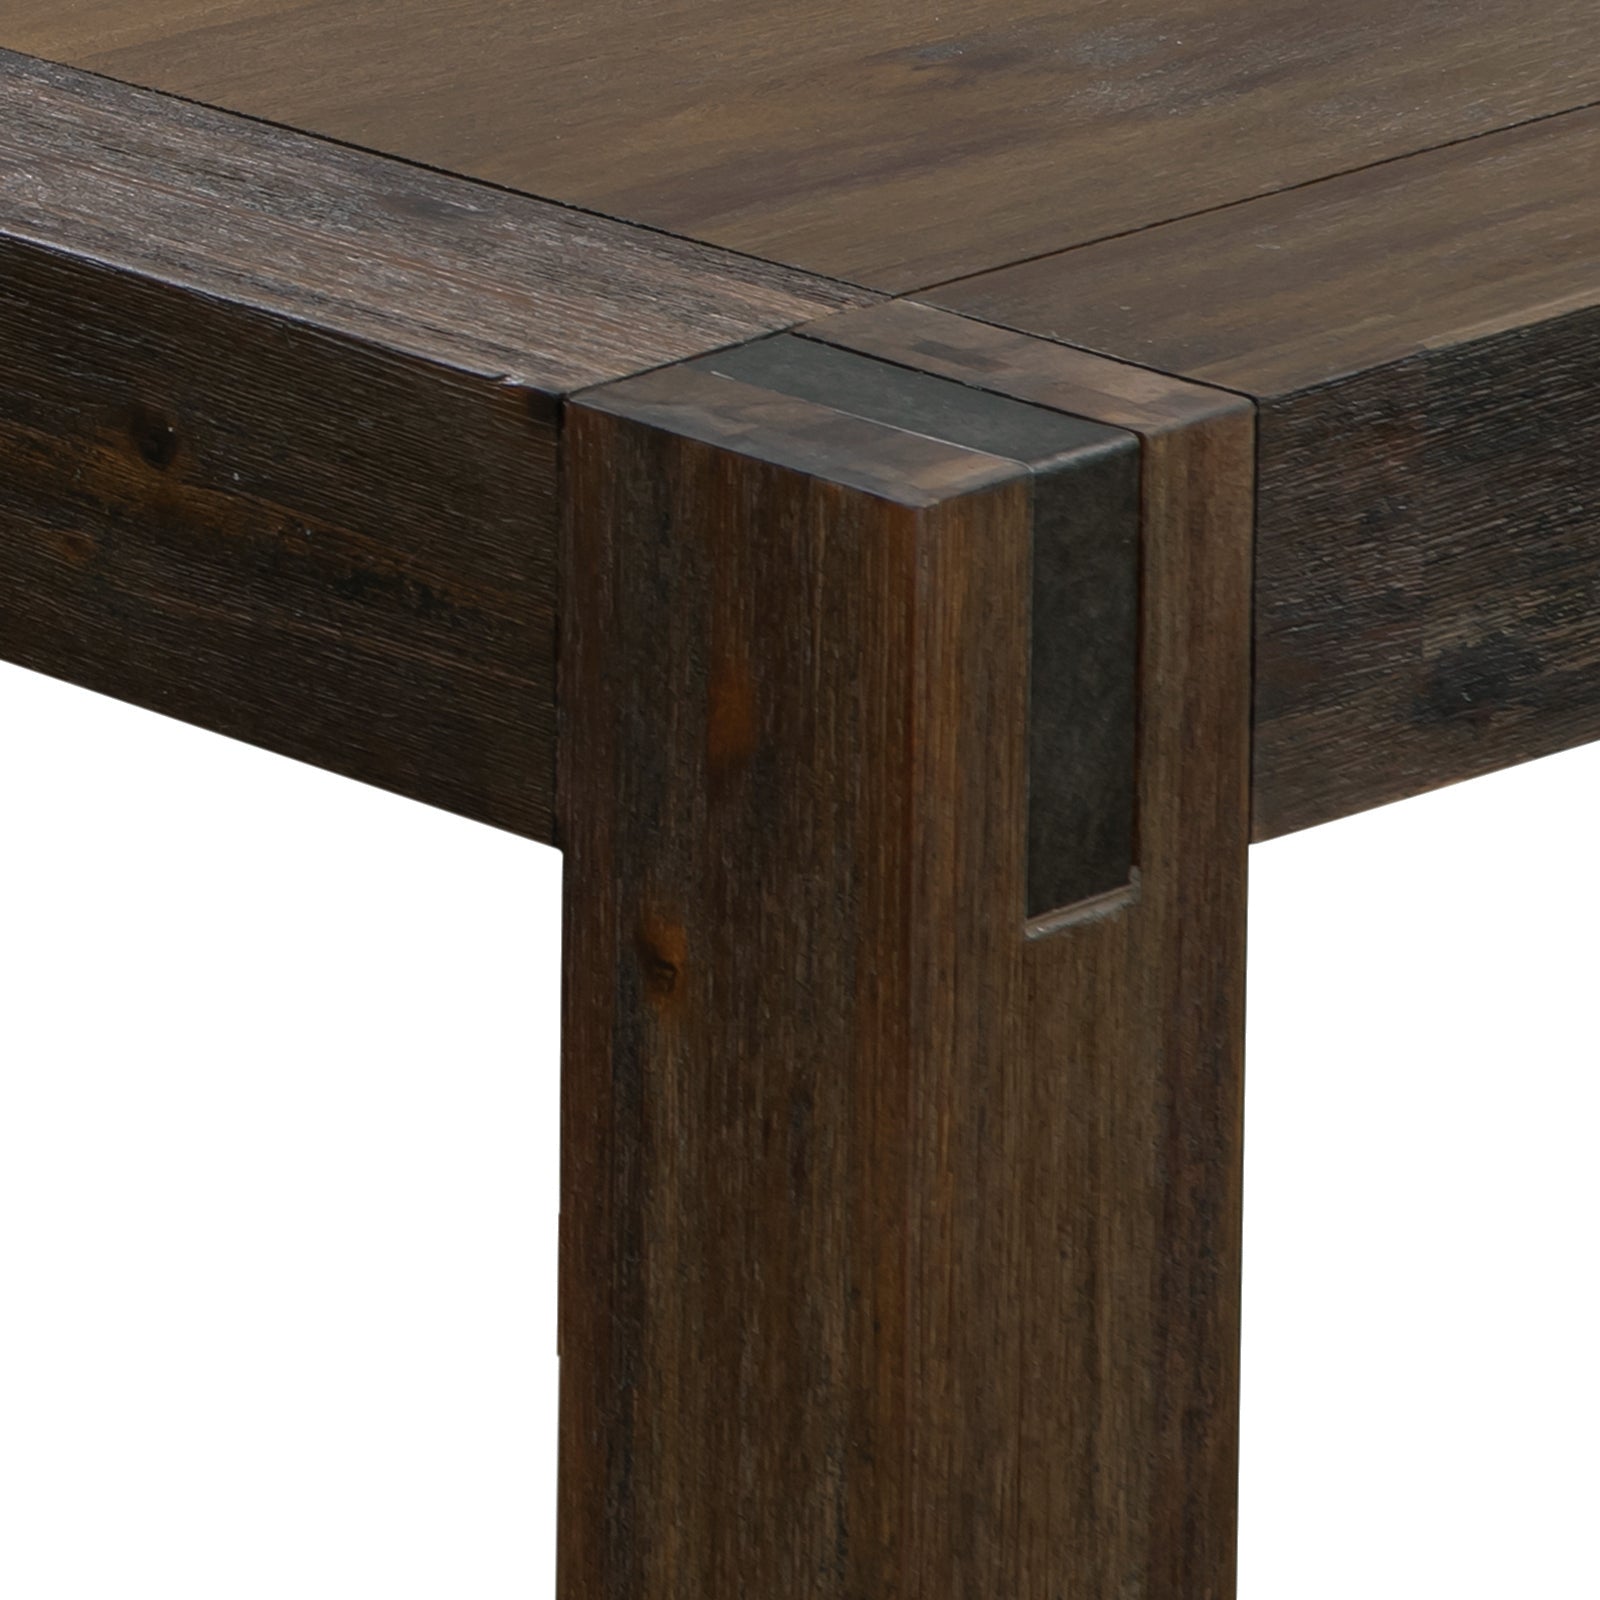 Dining Table with Acacia Medium Size Wooden Base in Oak Colour